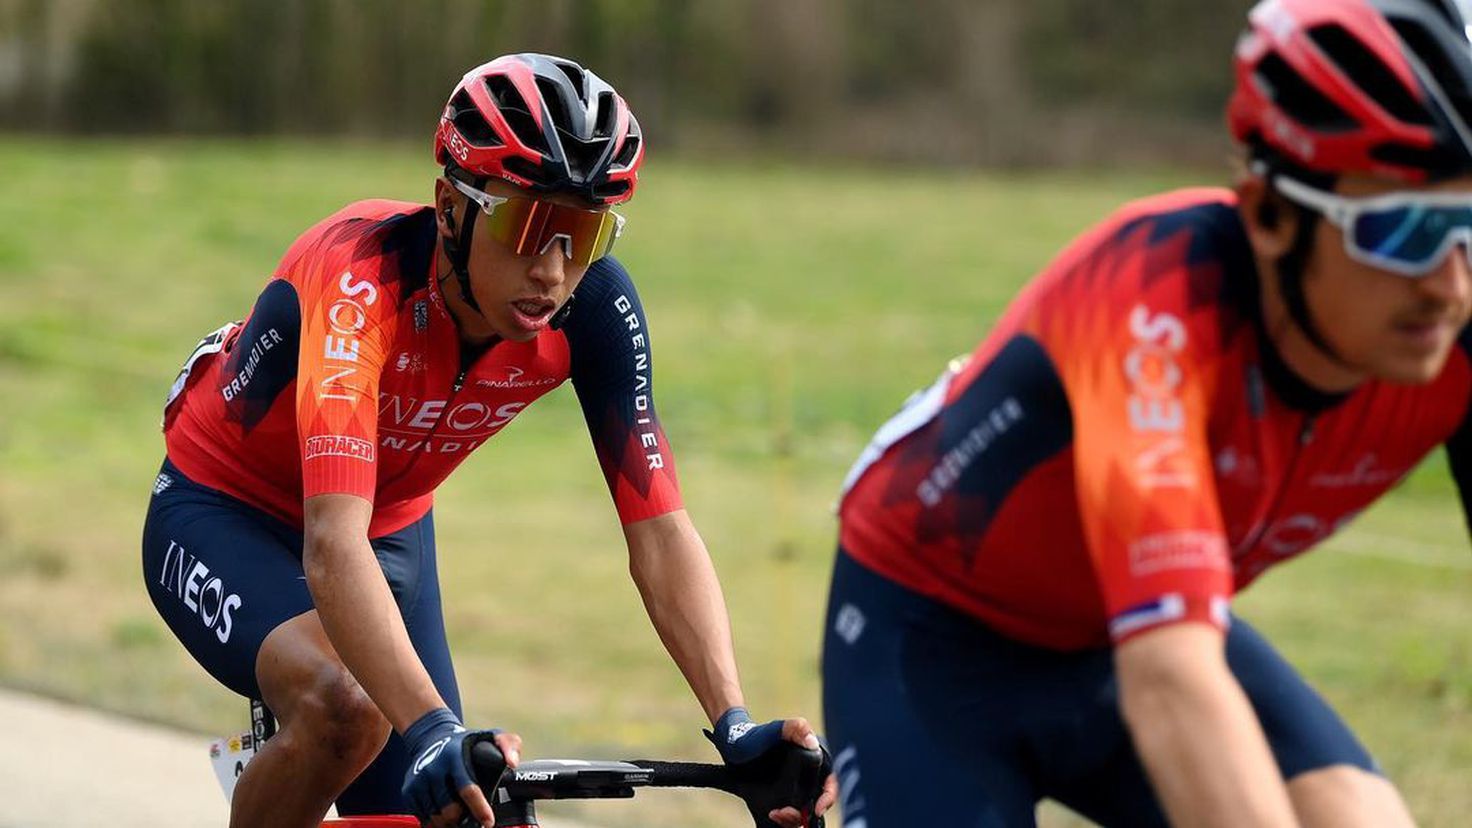 Egan Bernal, out of the Tour of Norway
